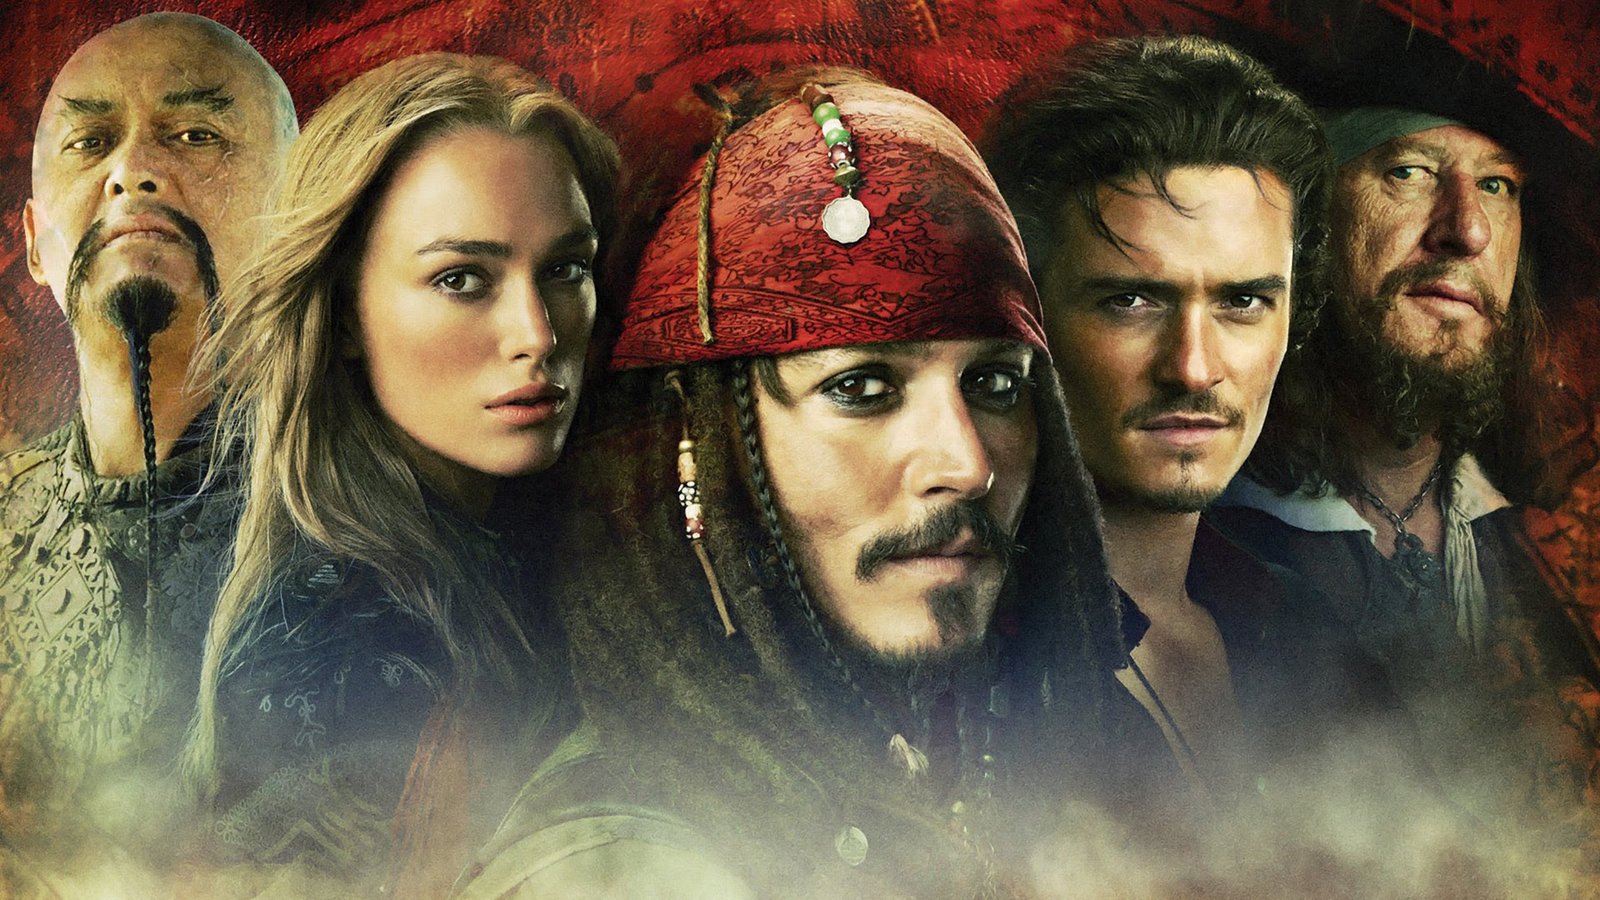  / Pirates of the Caribbean: At World's End